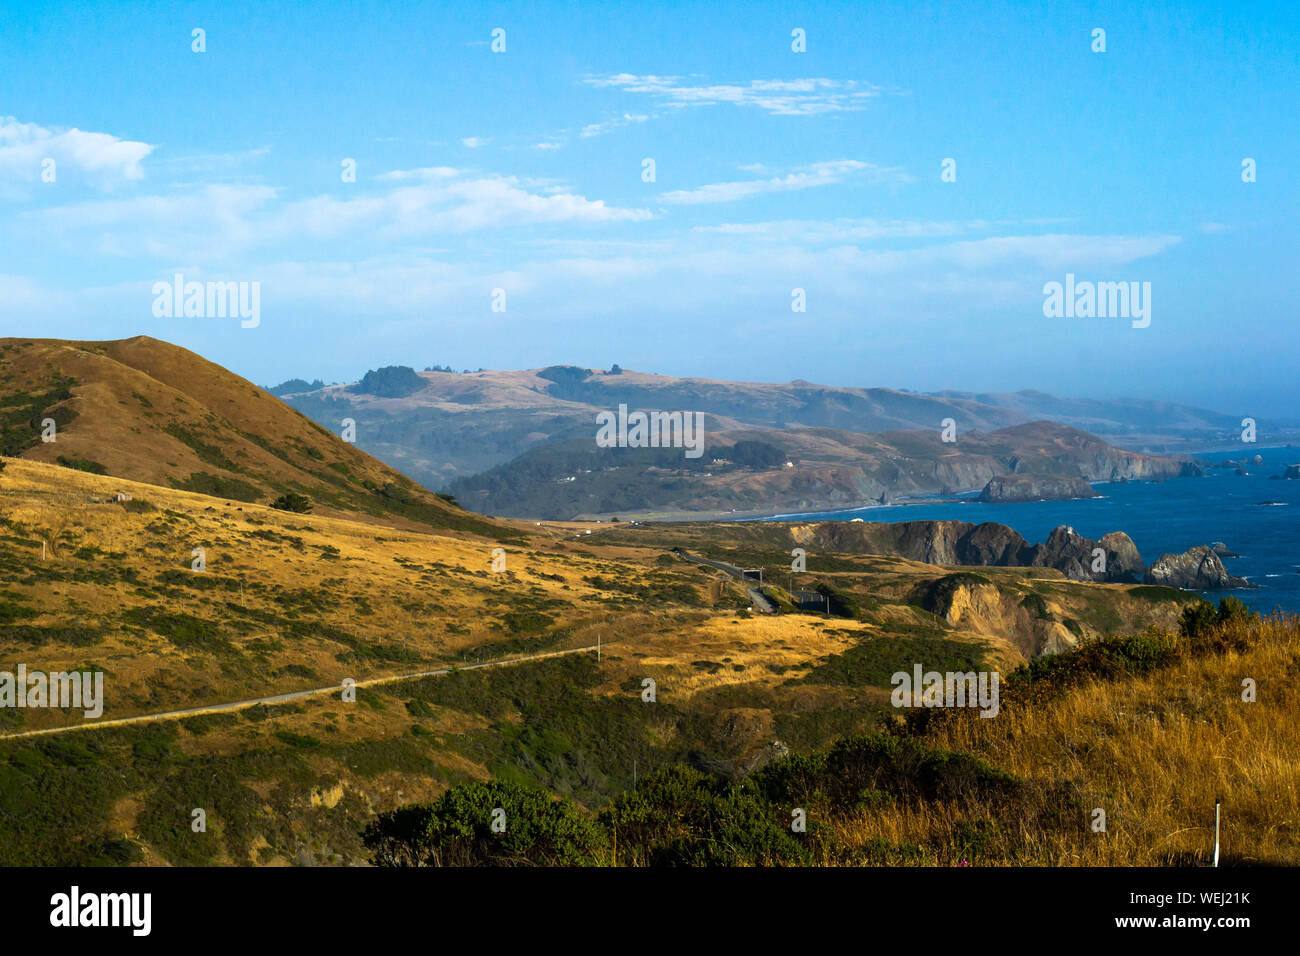 California, USA - August 6, 2019: An expansive vista of northern california's pacific coast highway Stock Photo